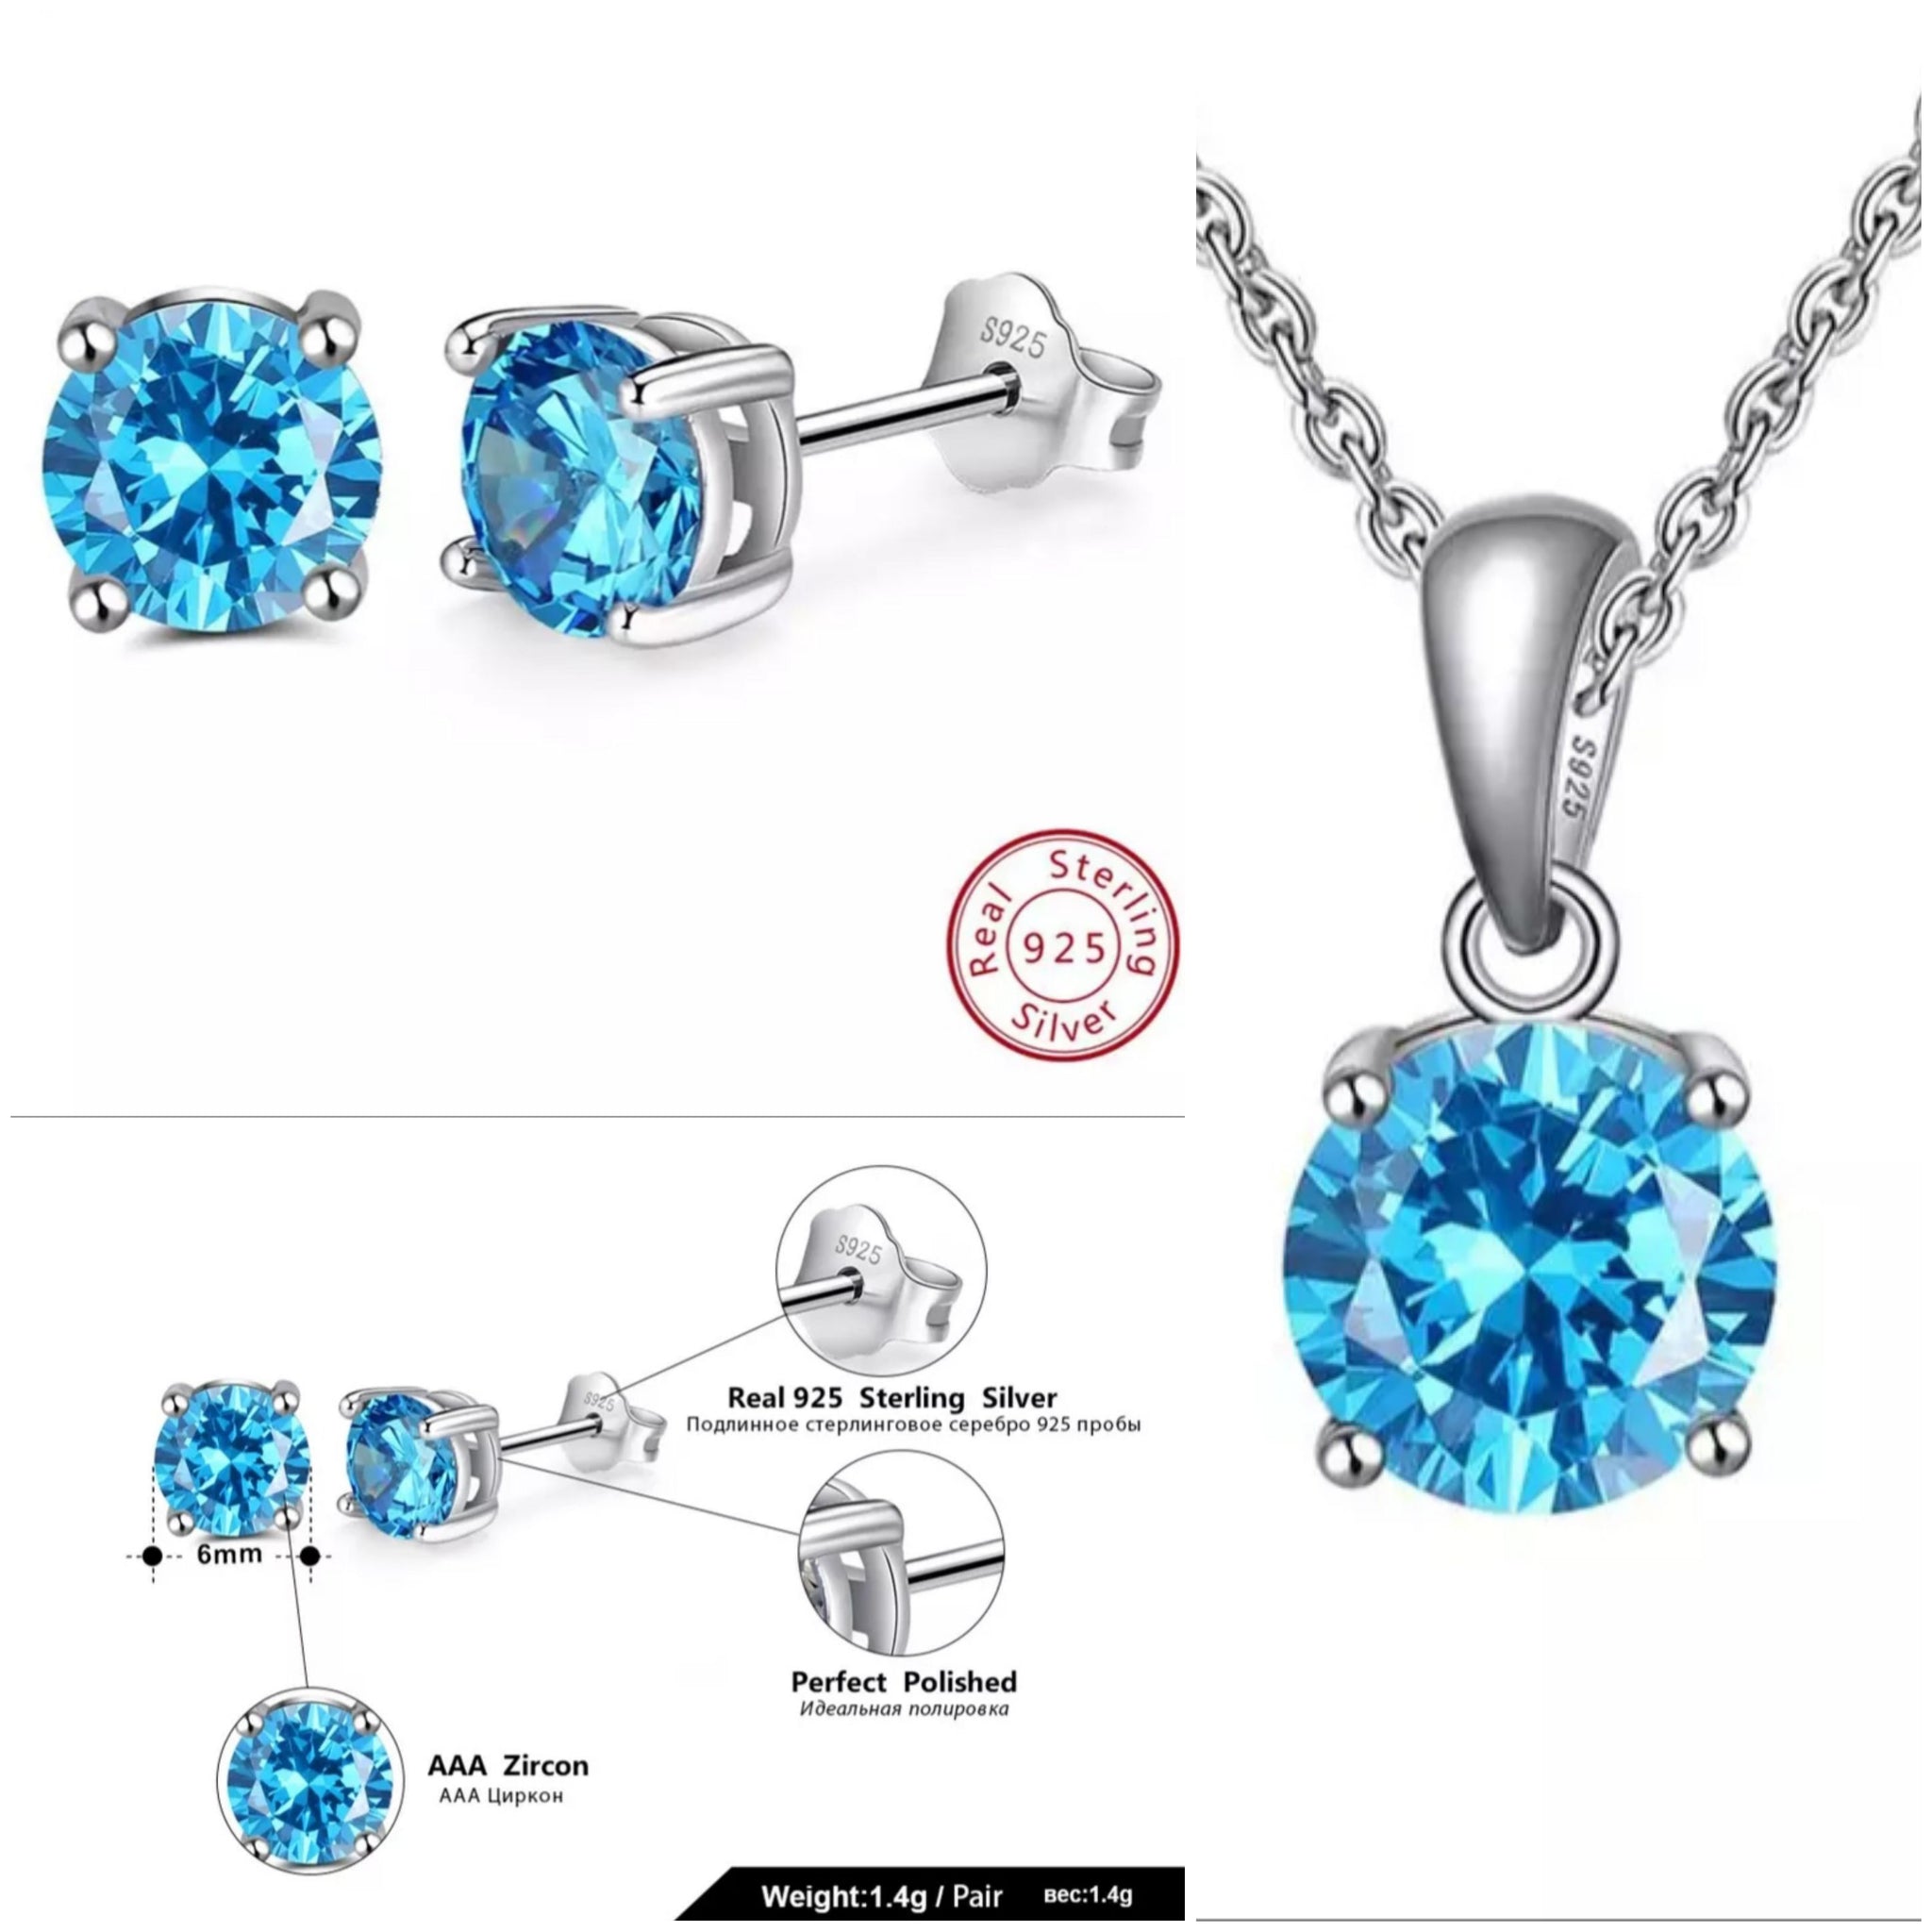 Sterling Silver Birthstone Stud Earrings and Necklace Set - HNS Studio